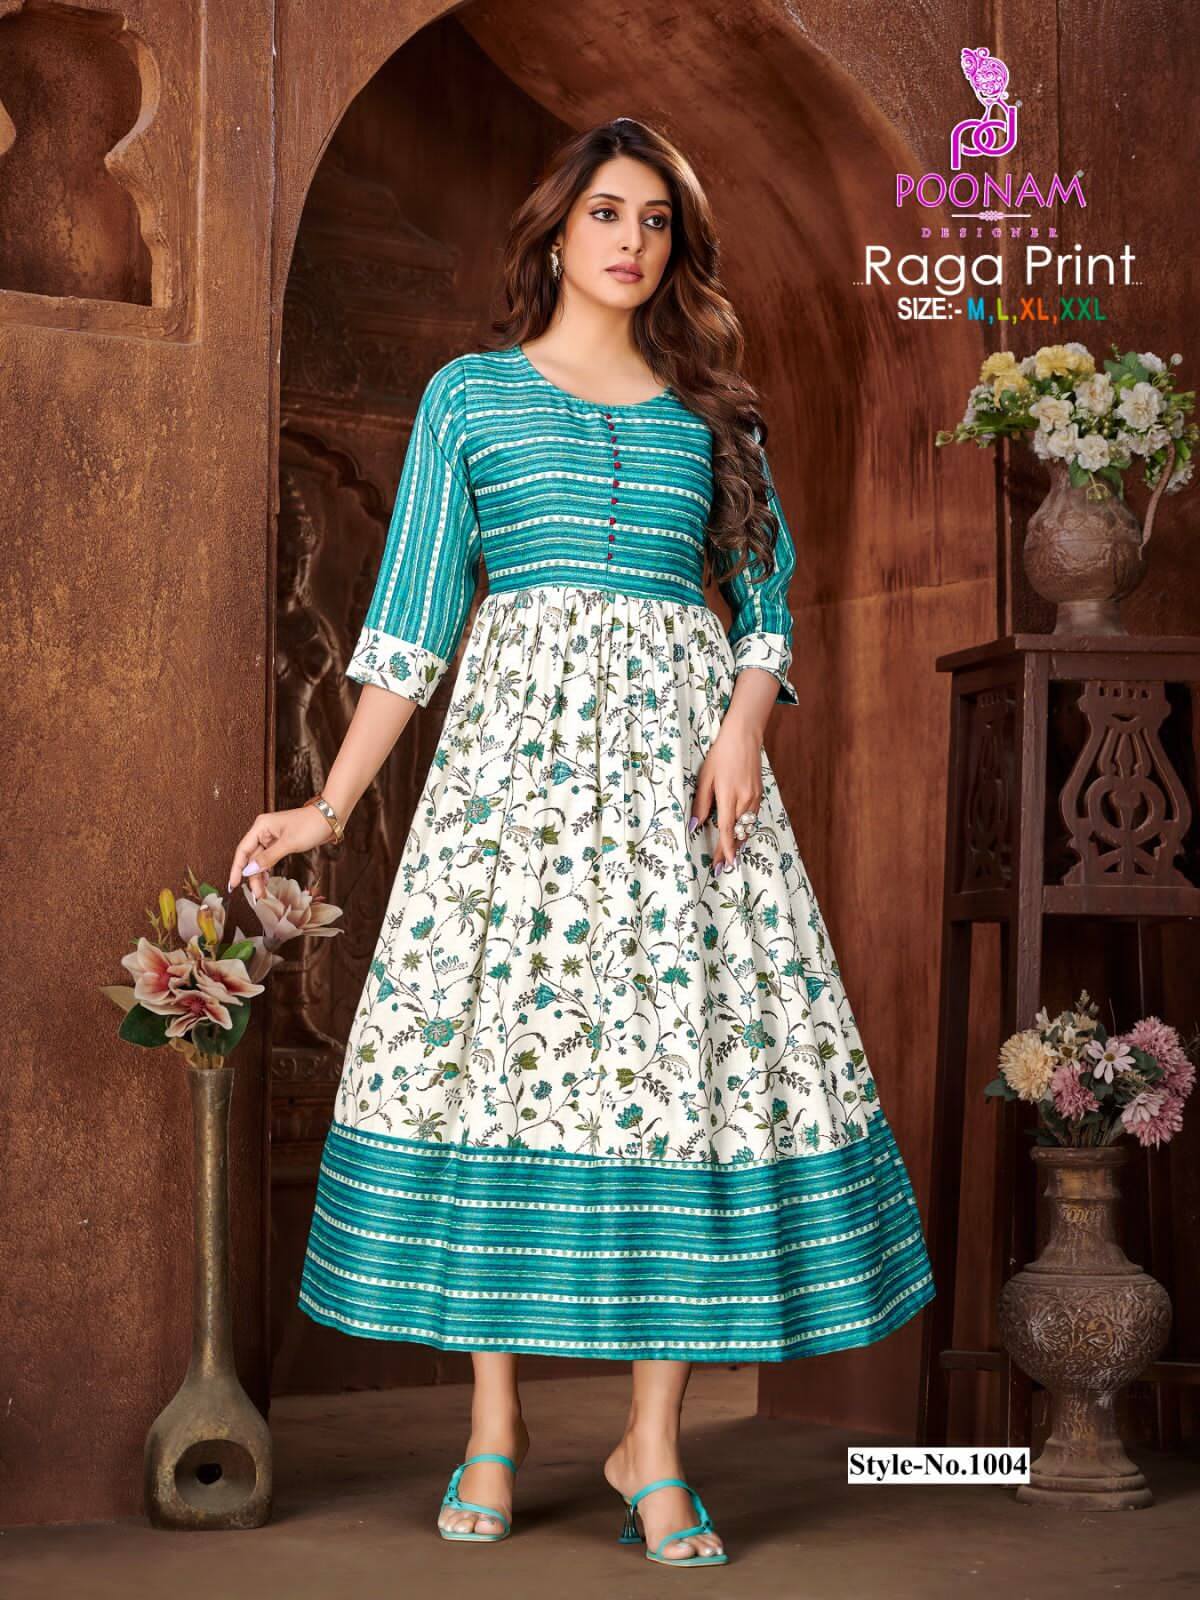 Poonam Raga Print Gowns Catalog collection 1